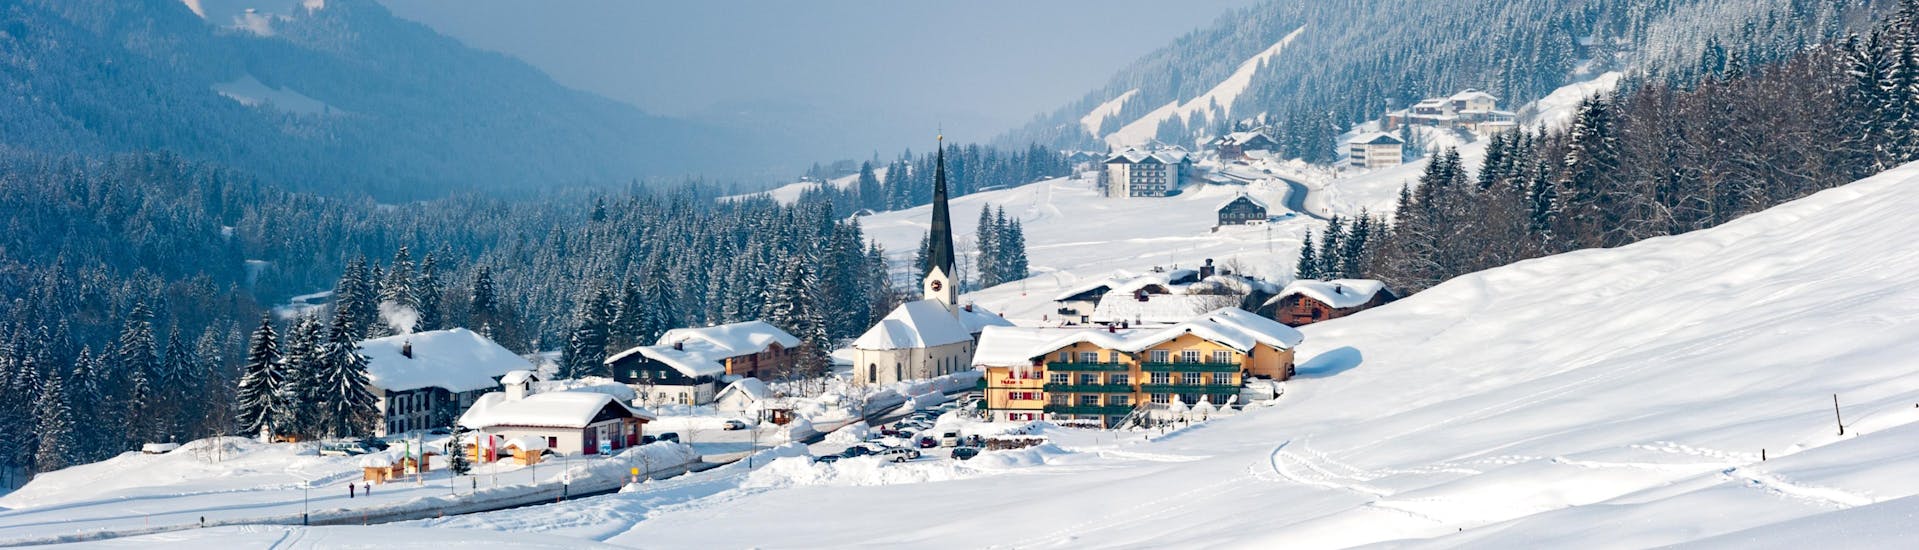 Picture of a small town on the slopes of Allgäu where you can book ski lessons.